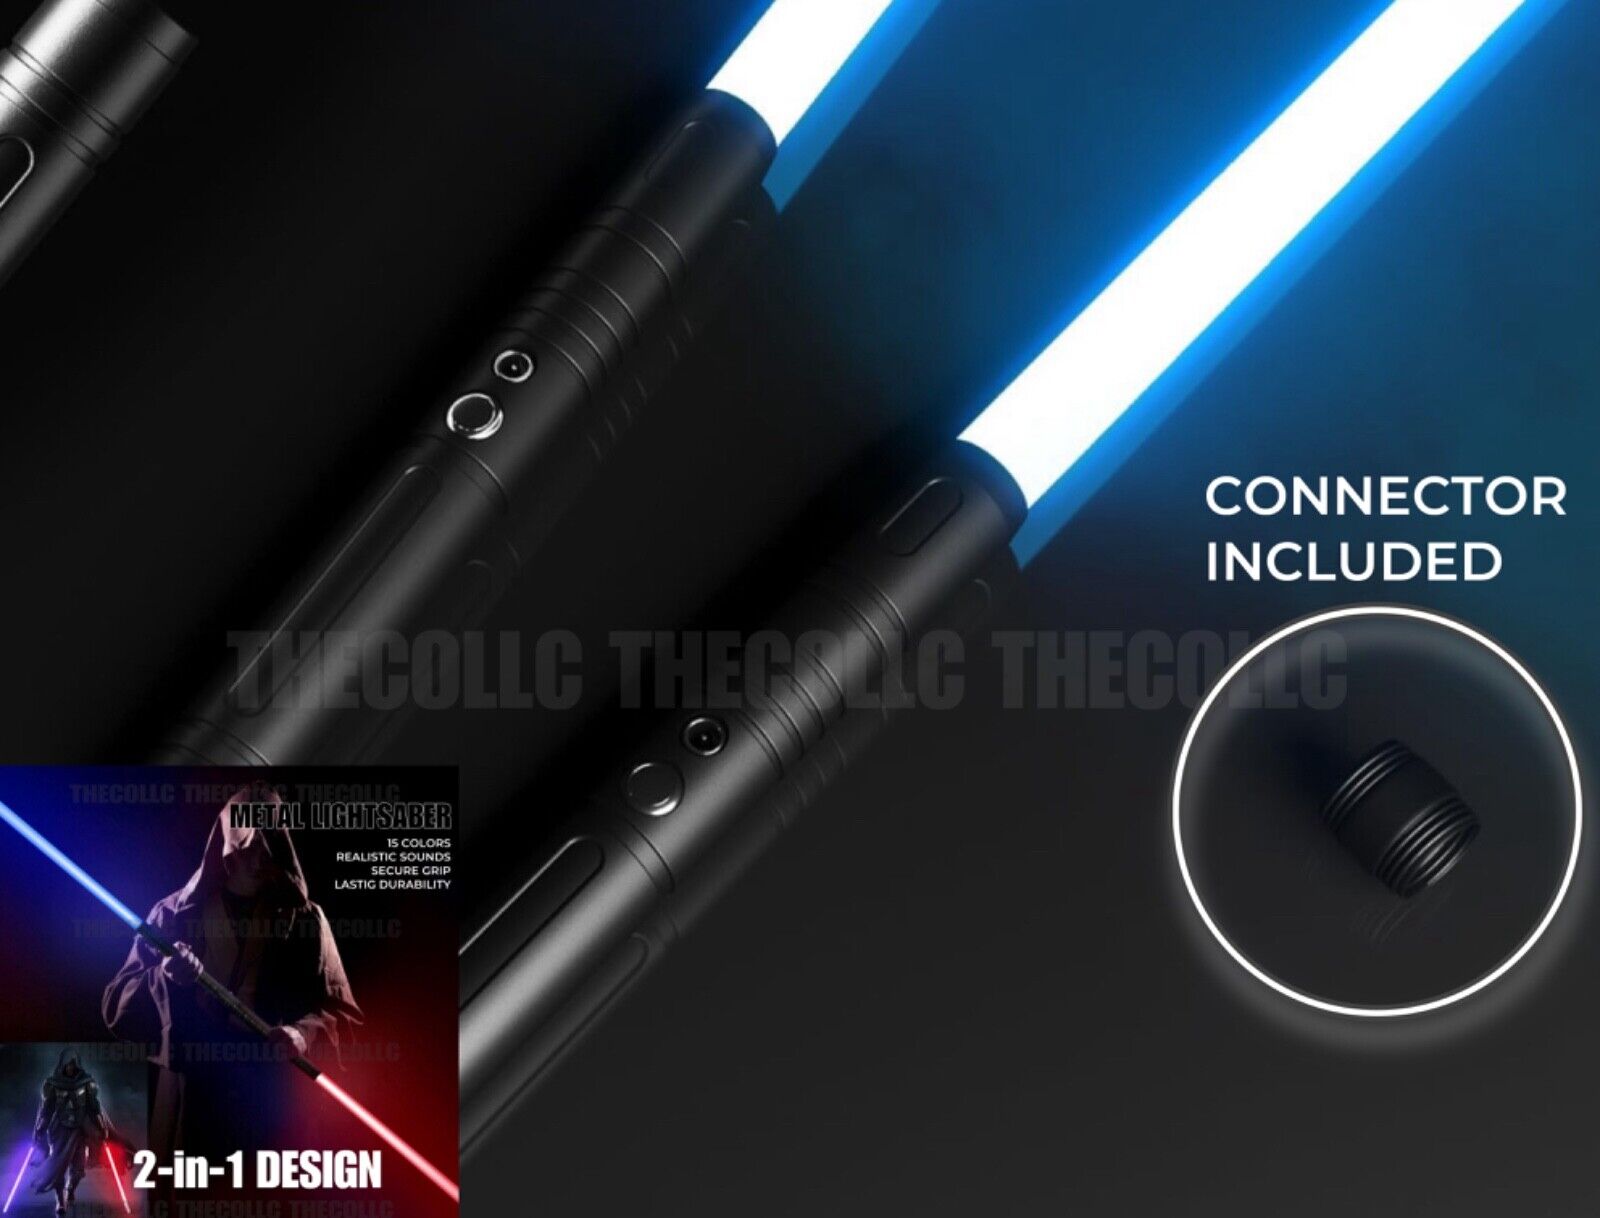 2 x Dueling LightSaber RGB 15 Colors w/ Realistic Sound Mode, Rechargeable